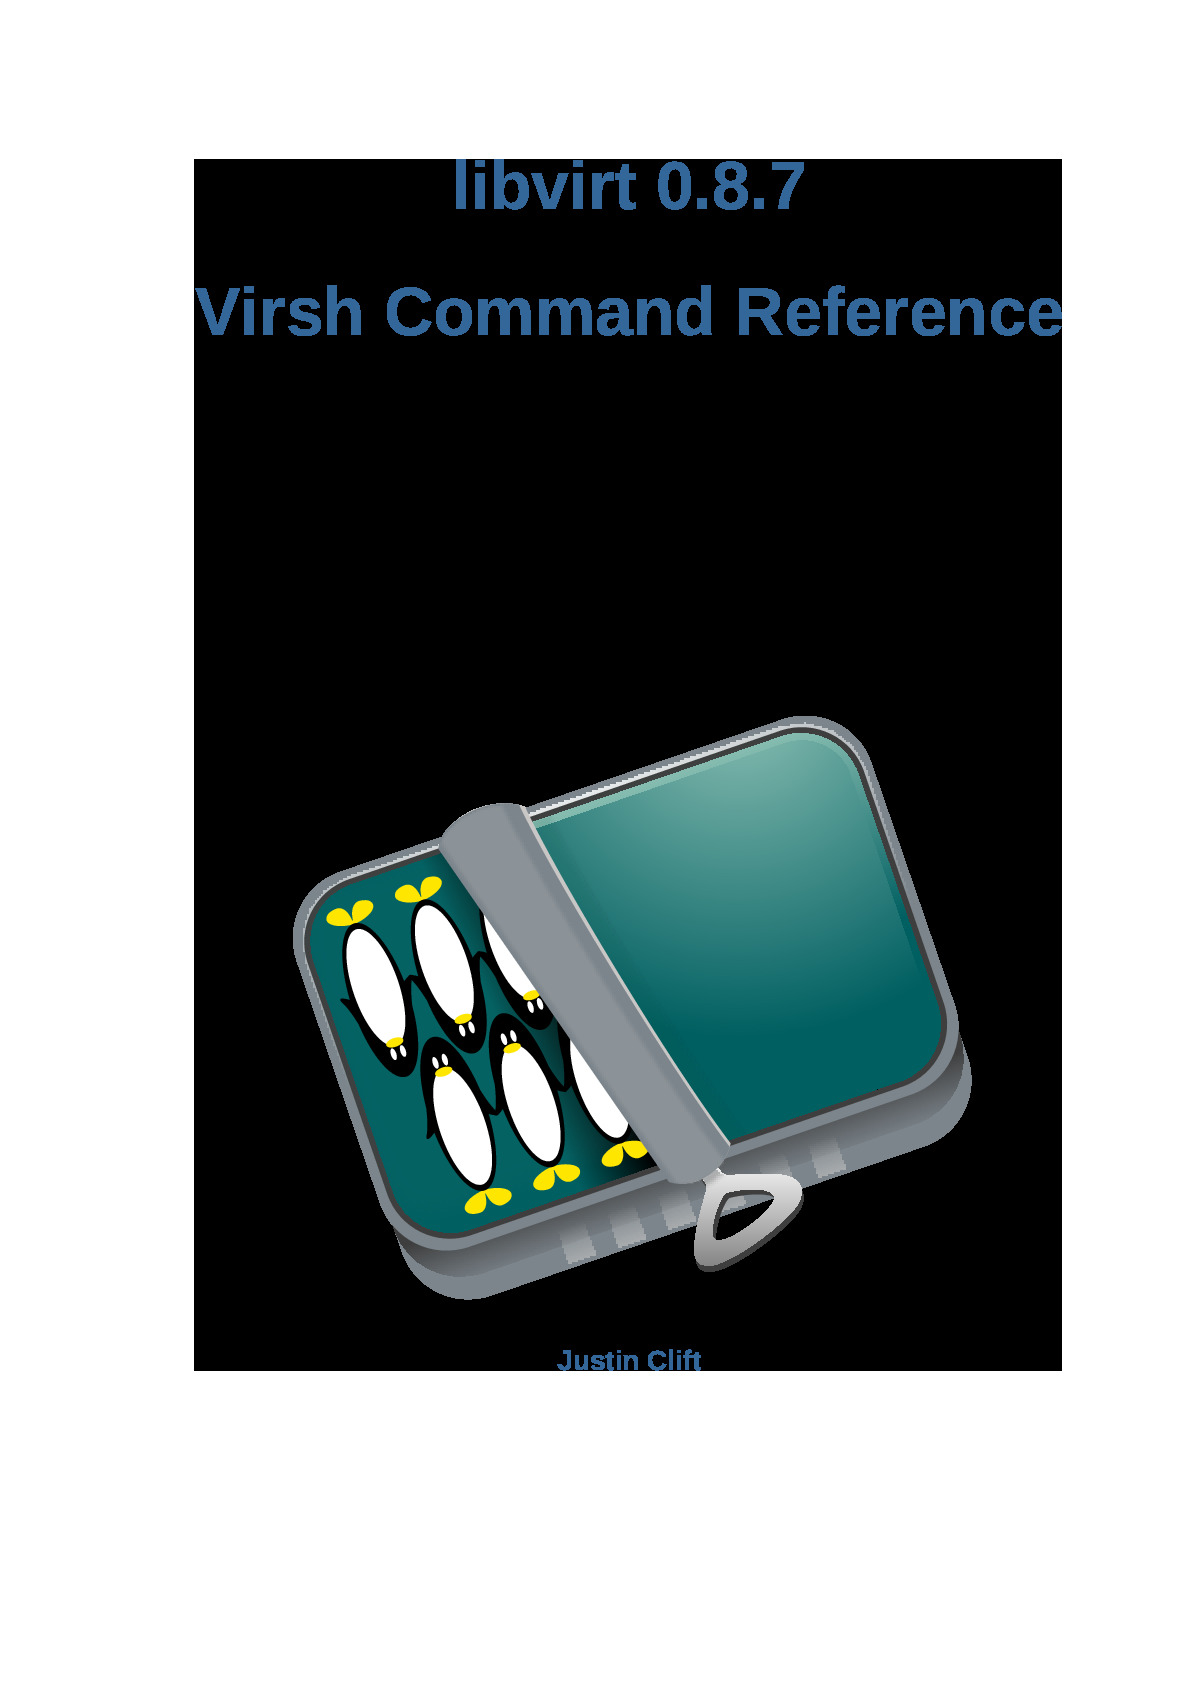 Virsh_Command_Reference-0.8.7-1